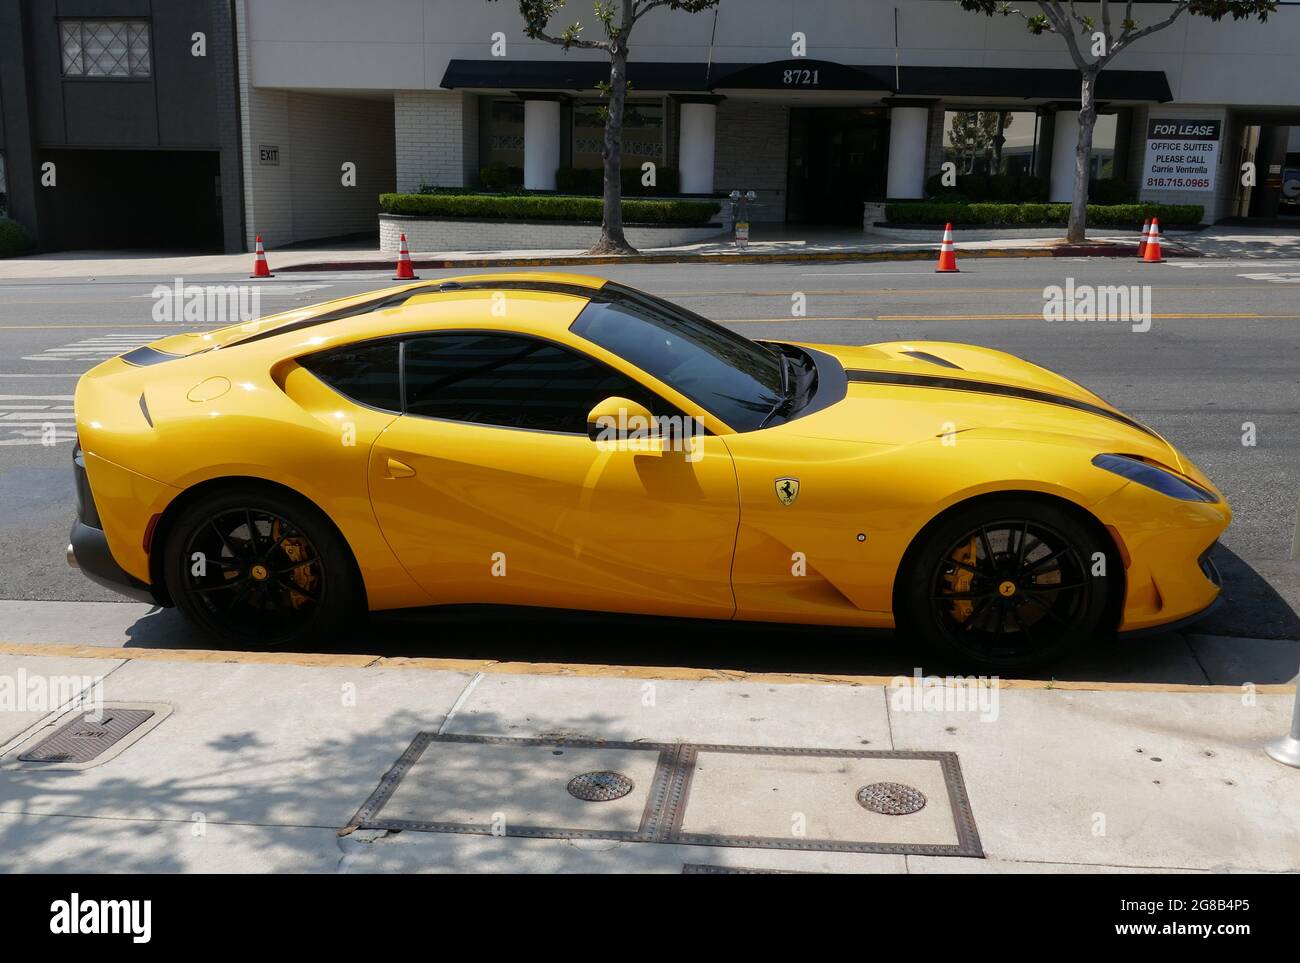 Los Angeles, California, USA 15th July 2021 A general view of atmosphere of Yellow Ferrari on Sunset Blvd on July 15, 2021 in Los Angeles, California, USA. Photo by Barry King/Alamy Stock Photo Stock Photo